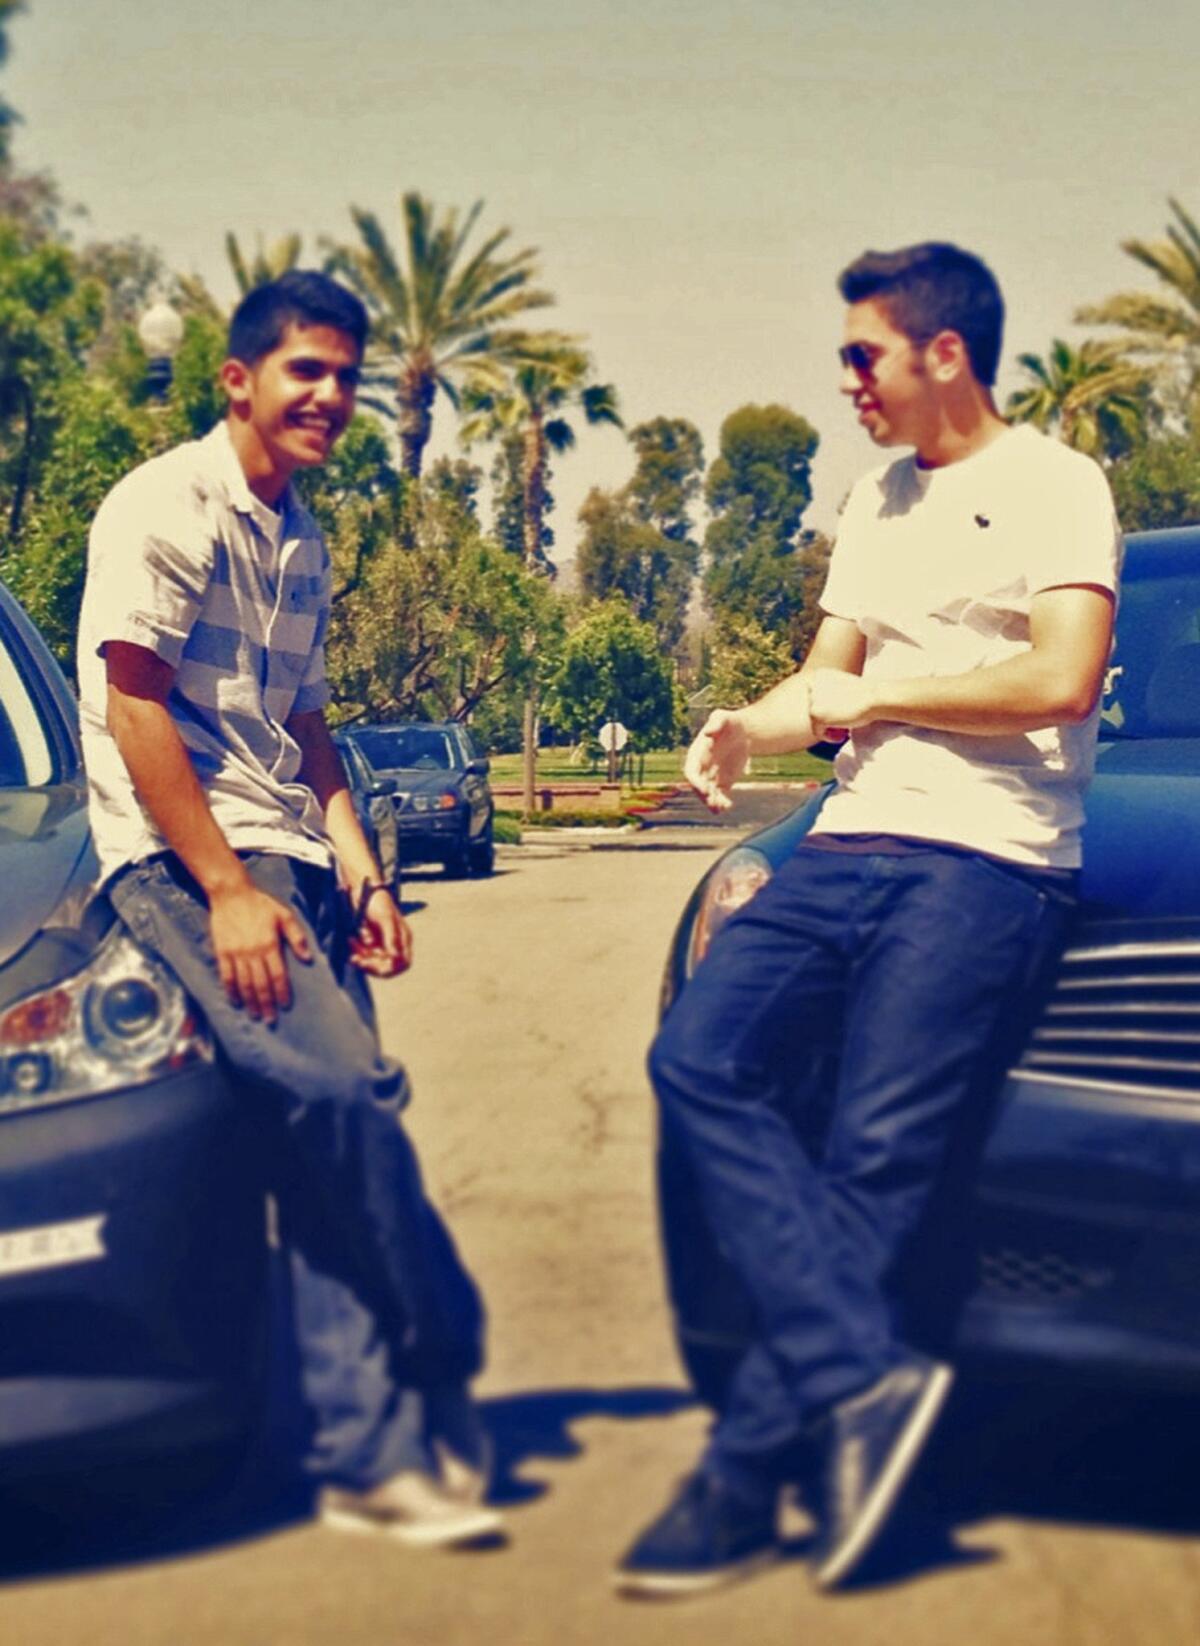 A cell phone photo of Abdulrahman Alyahyan, left, the driver of the car in which 5 teenagers were killed on Monday in Newport Beach, CA. On the right is his Irvine High School friend Omar Soussan, who provided the photo.